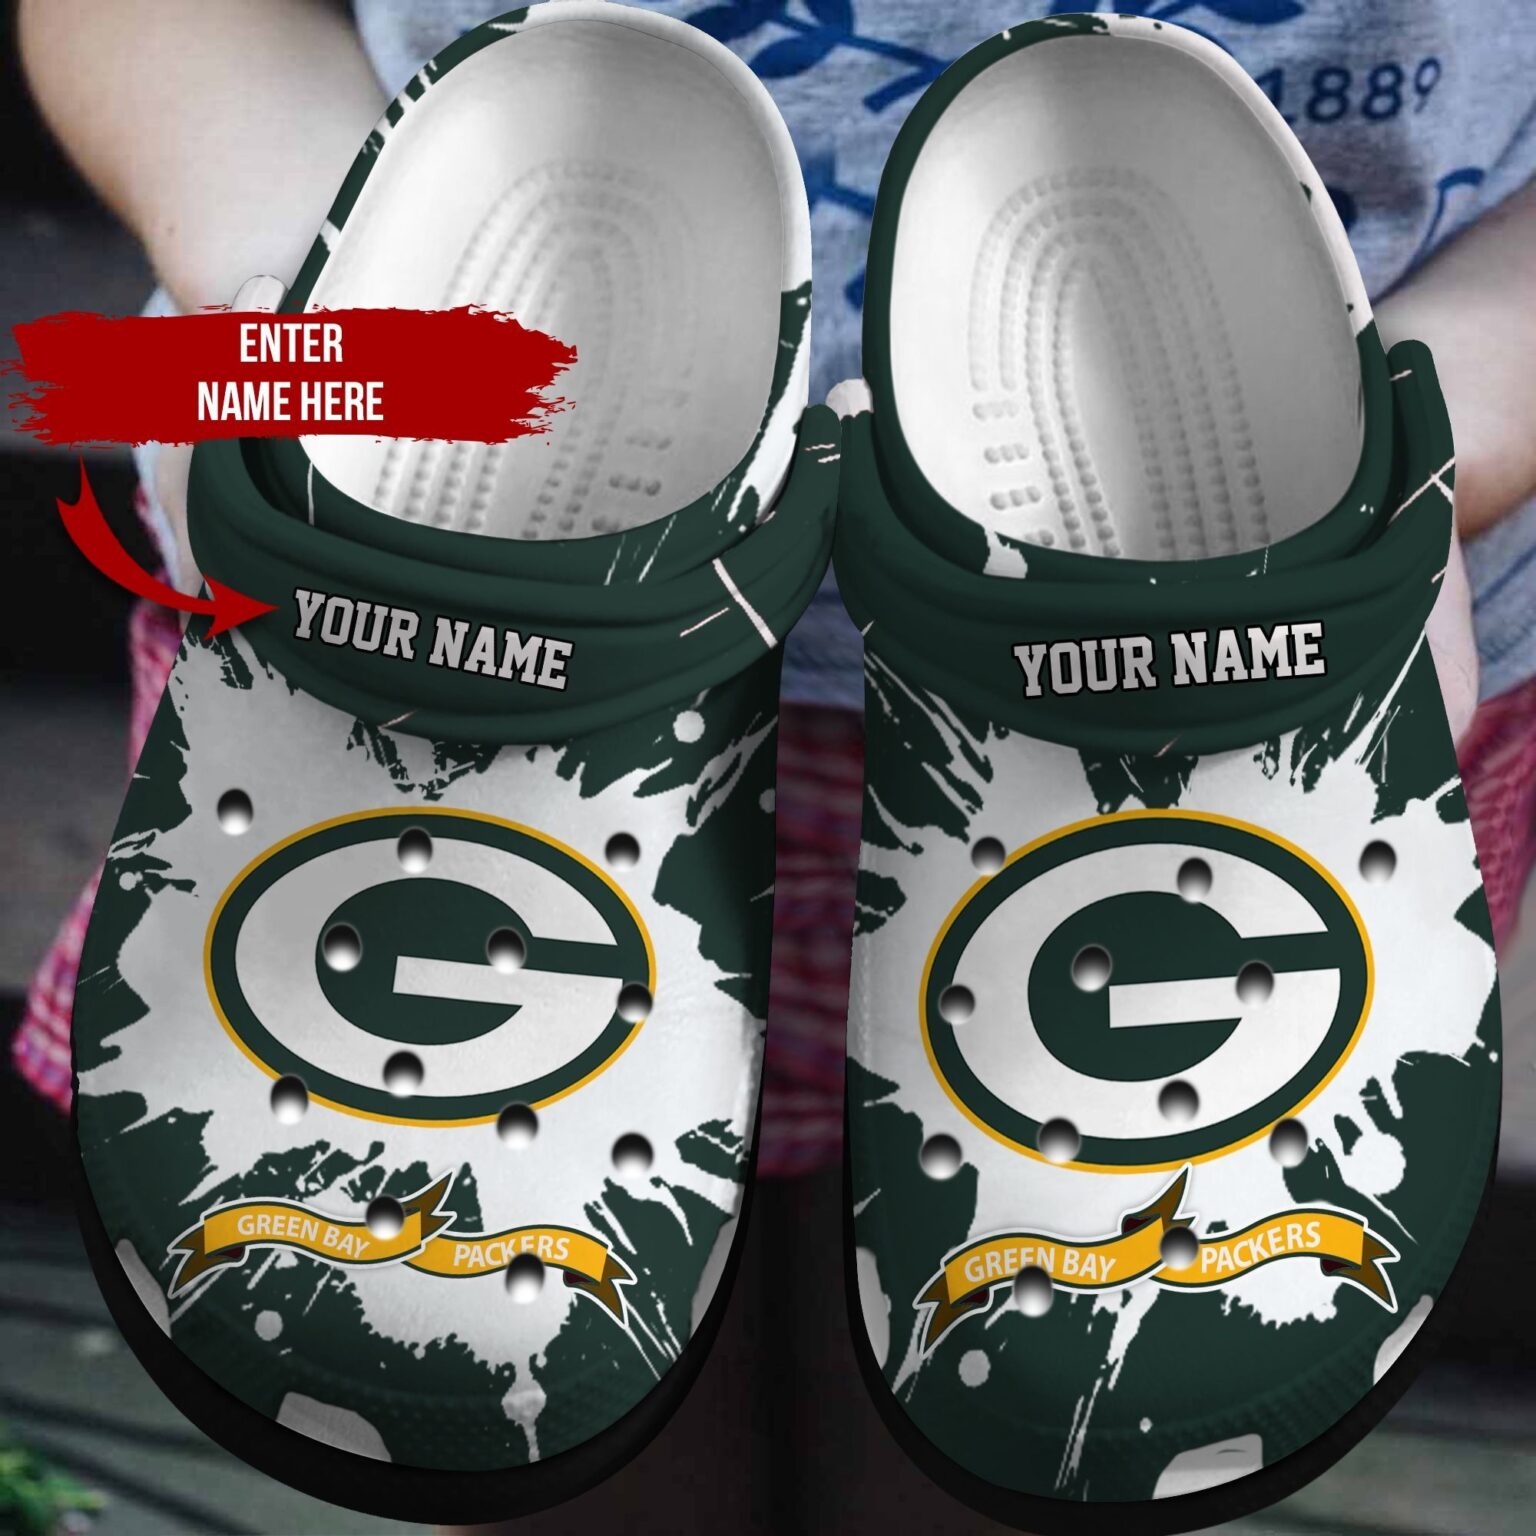 Green Bay Packers Nfl Football Personalized Crocs Crocband Clog Unisex ...